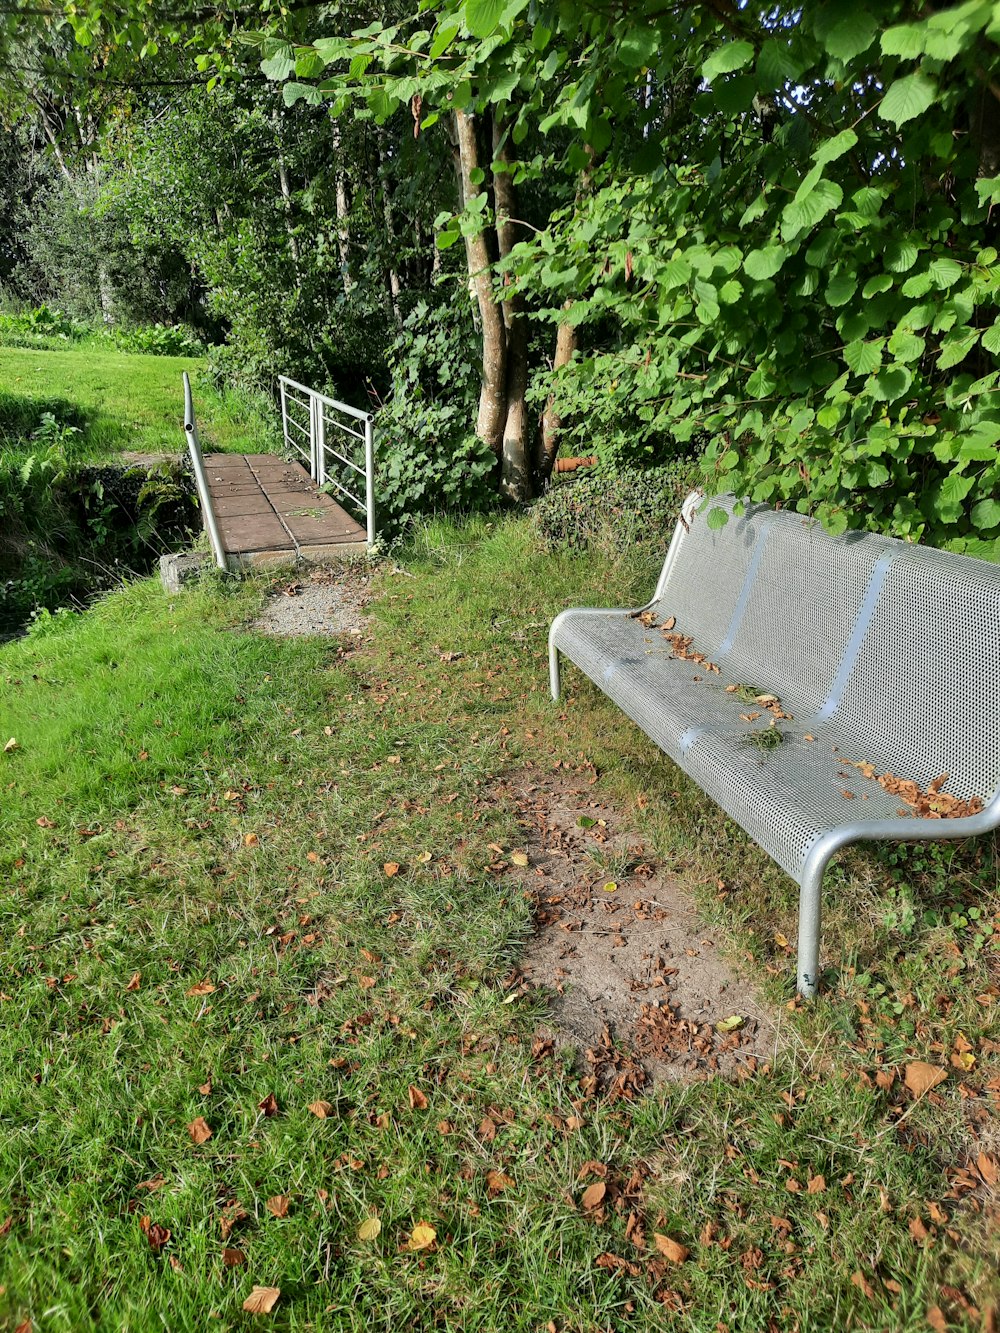 a bench in a park